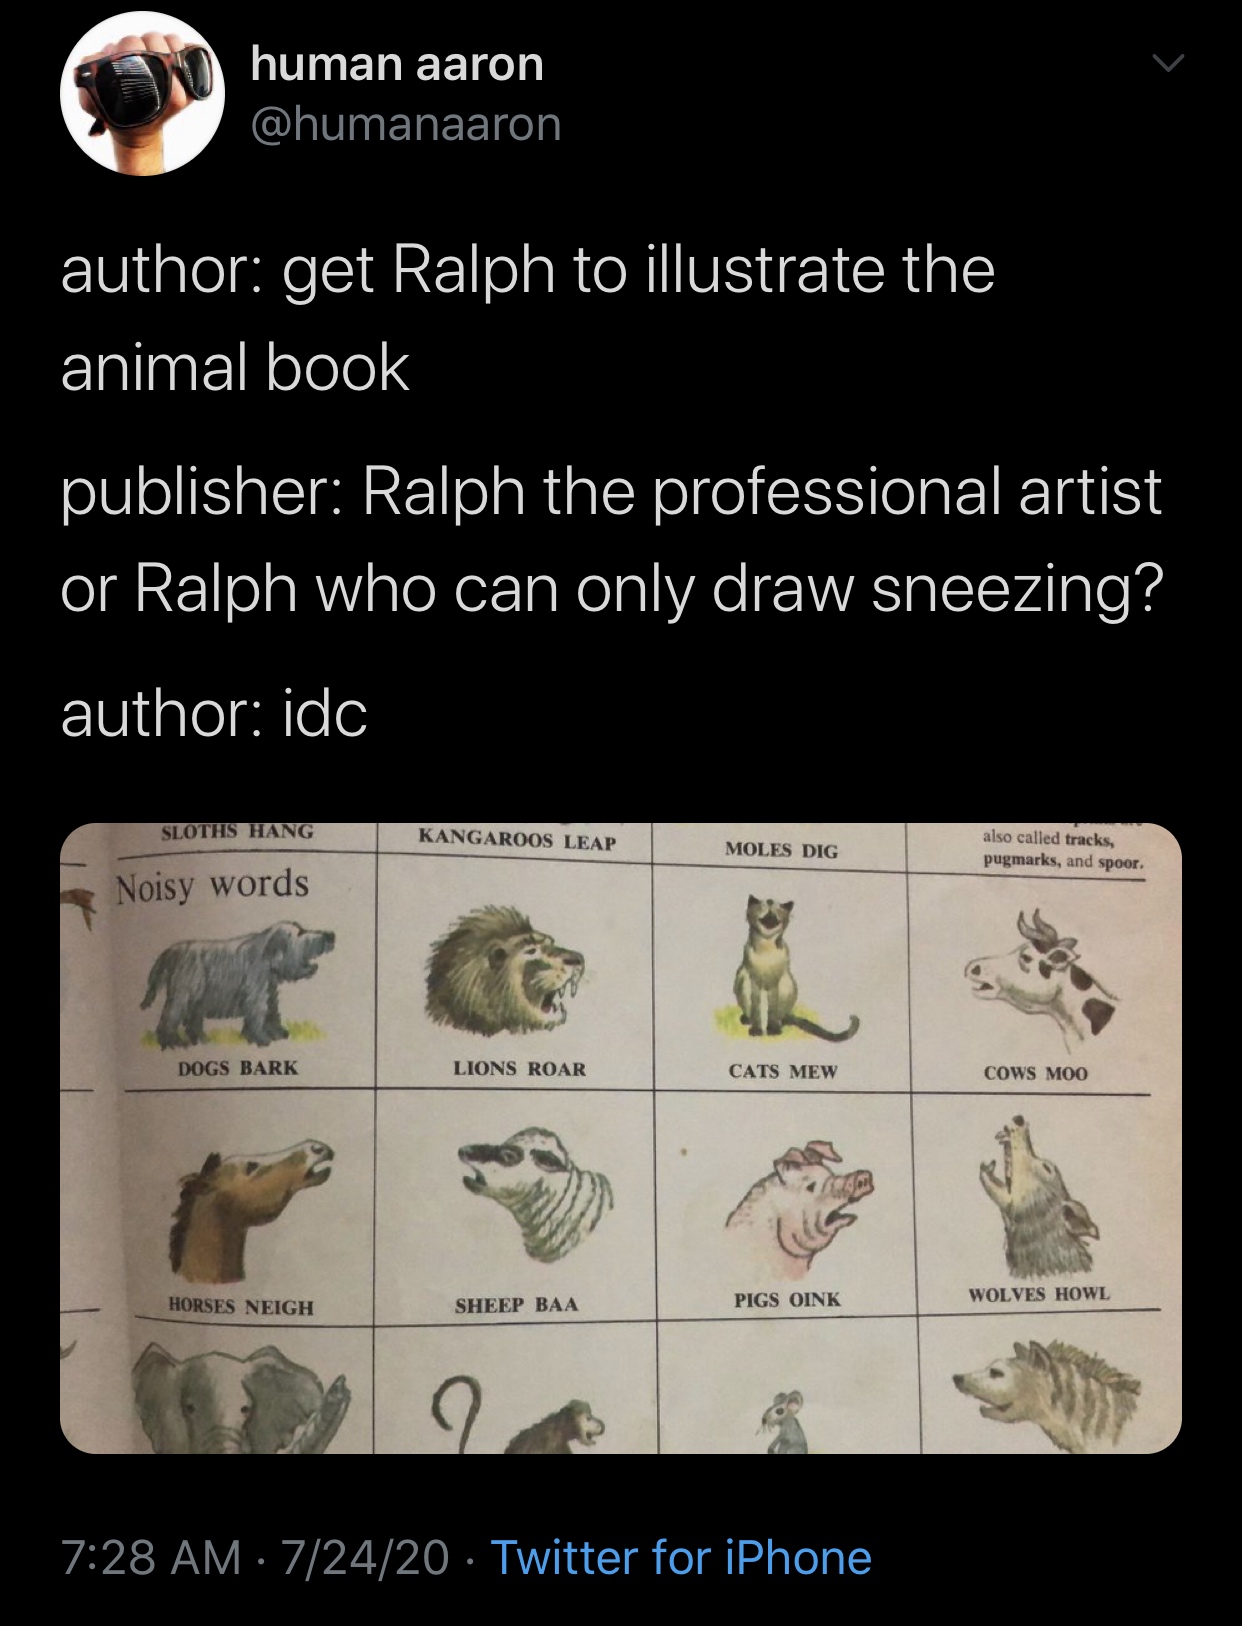 fauna - human aaron author get Ralph to illustrate the animal book publisher Ralph the professional artist or Ralph who can only draw sneezing? author idc Sloths Hang Kangaroos Leap Moles Dig also called tracks, pugmarks, and spoor, Noisy words Dogs Bark 